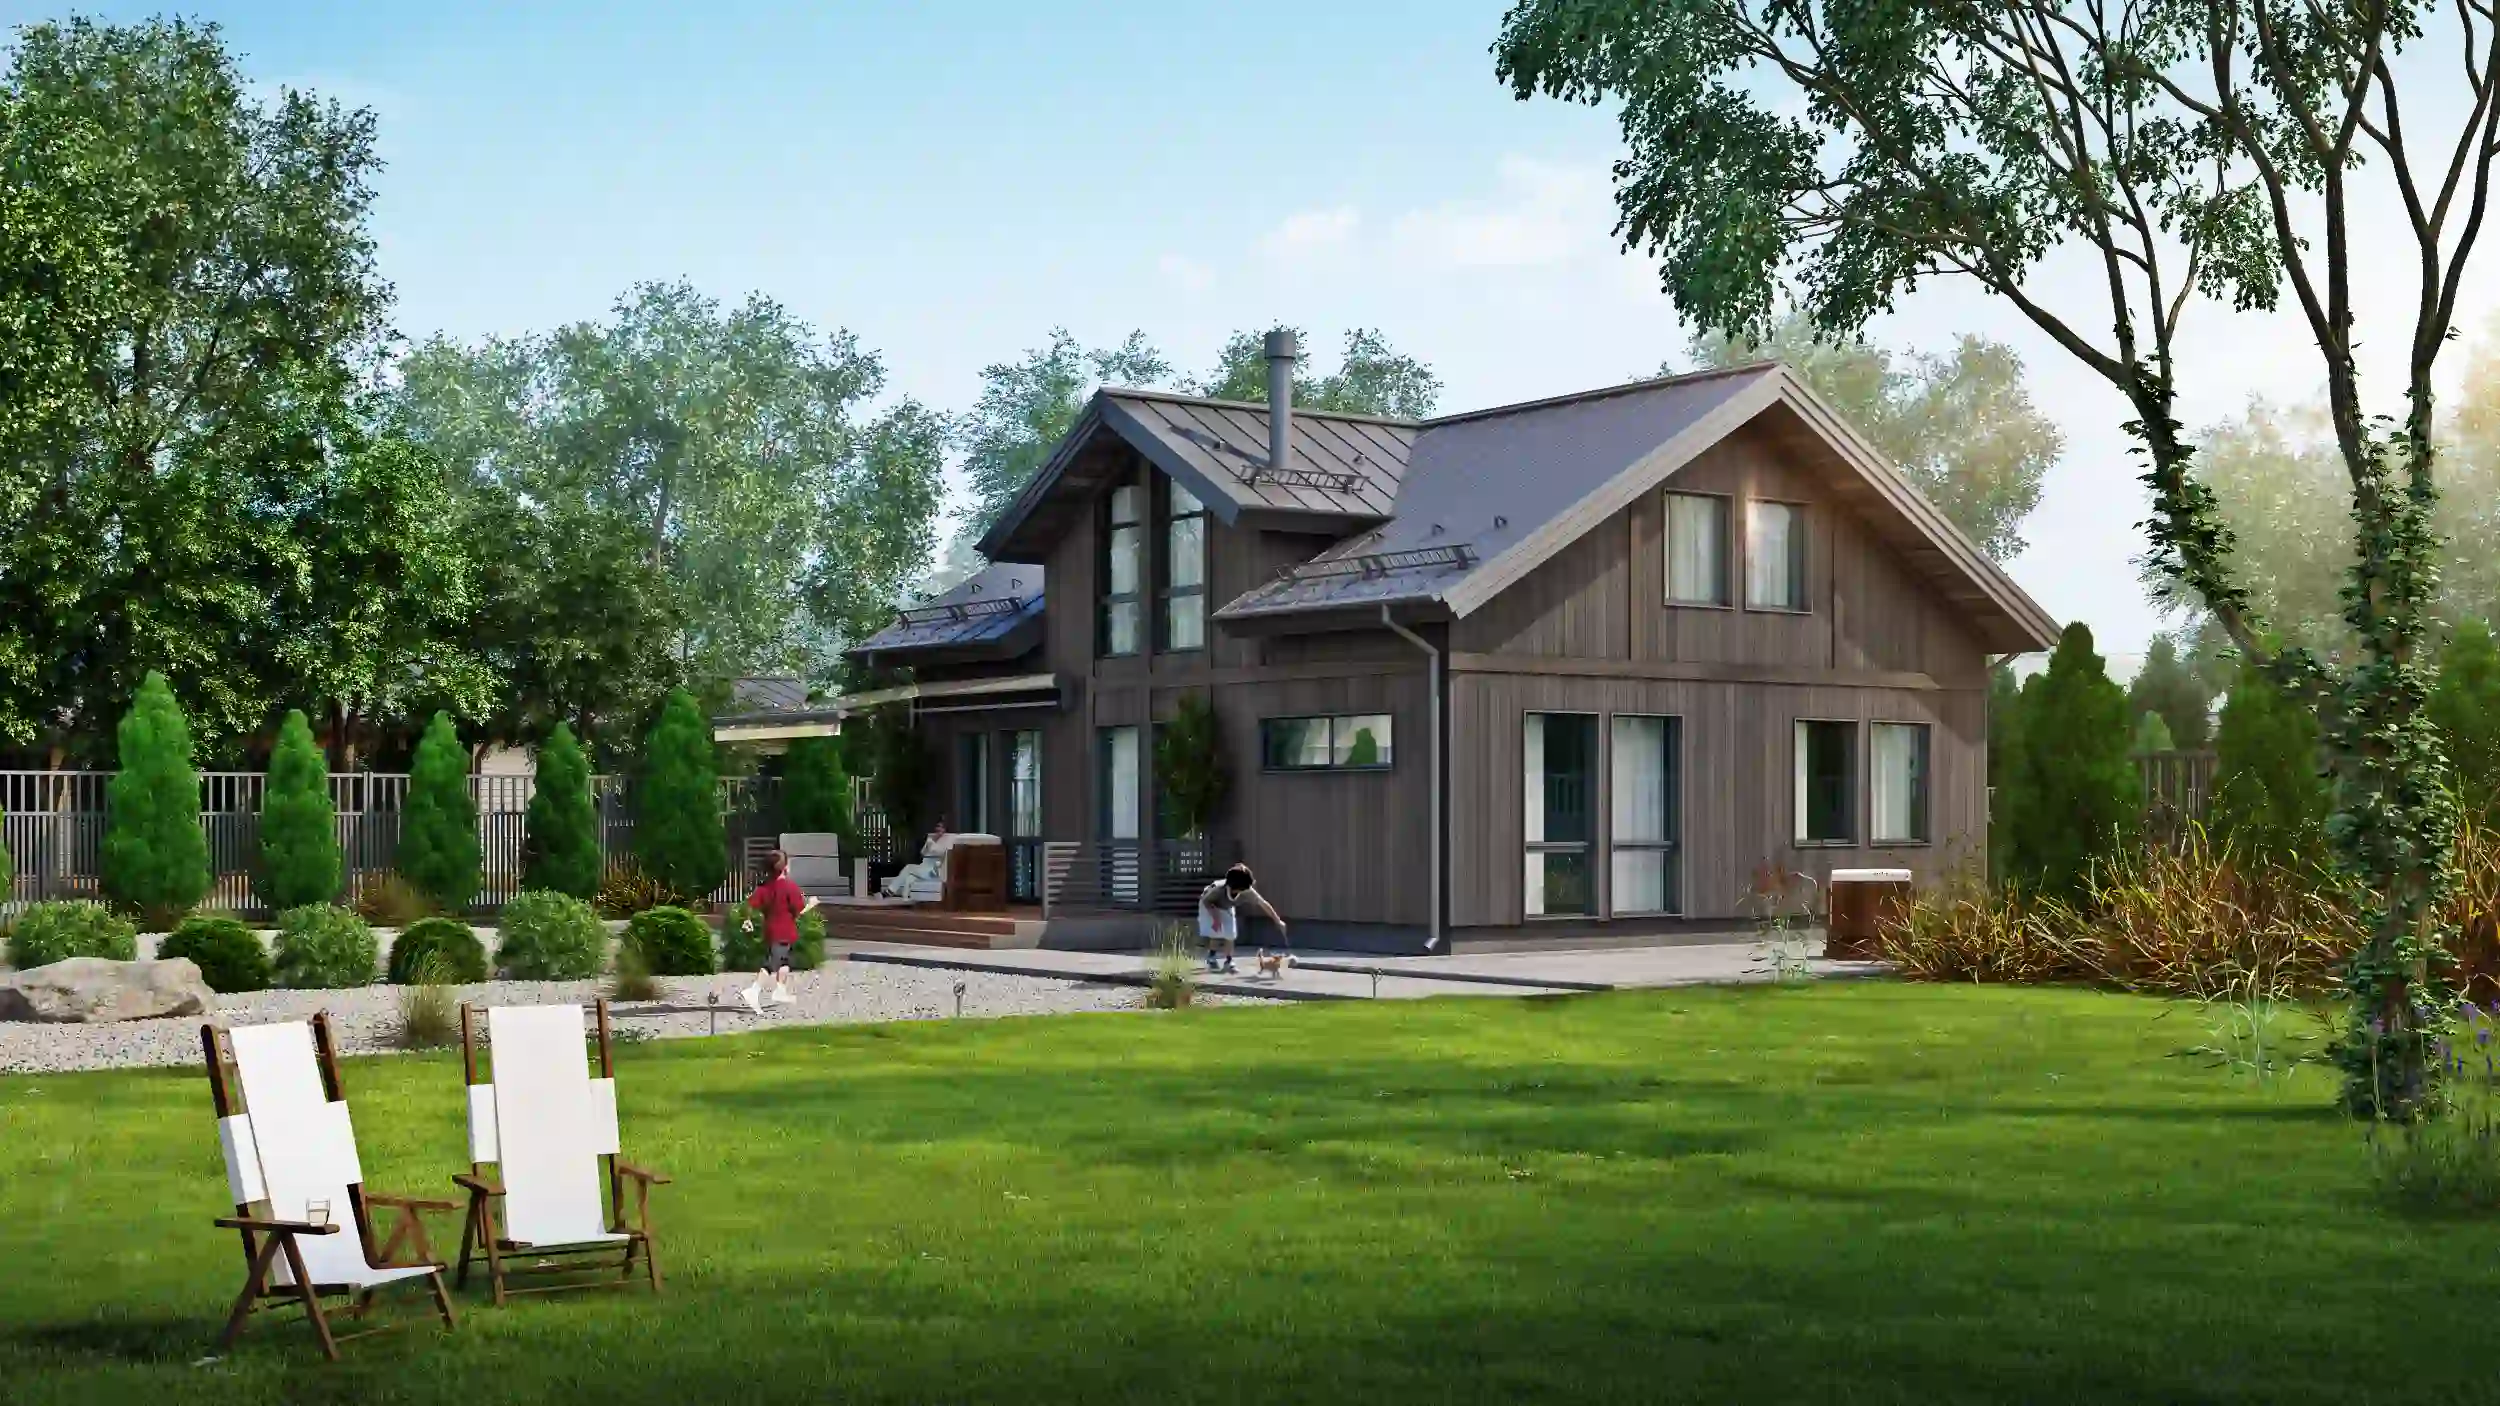 THE CONCEPT OF A COTTAGE VILLAGE, MOSCOW REGION 2021